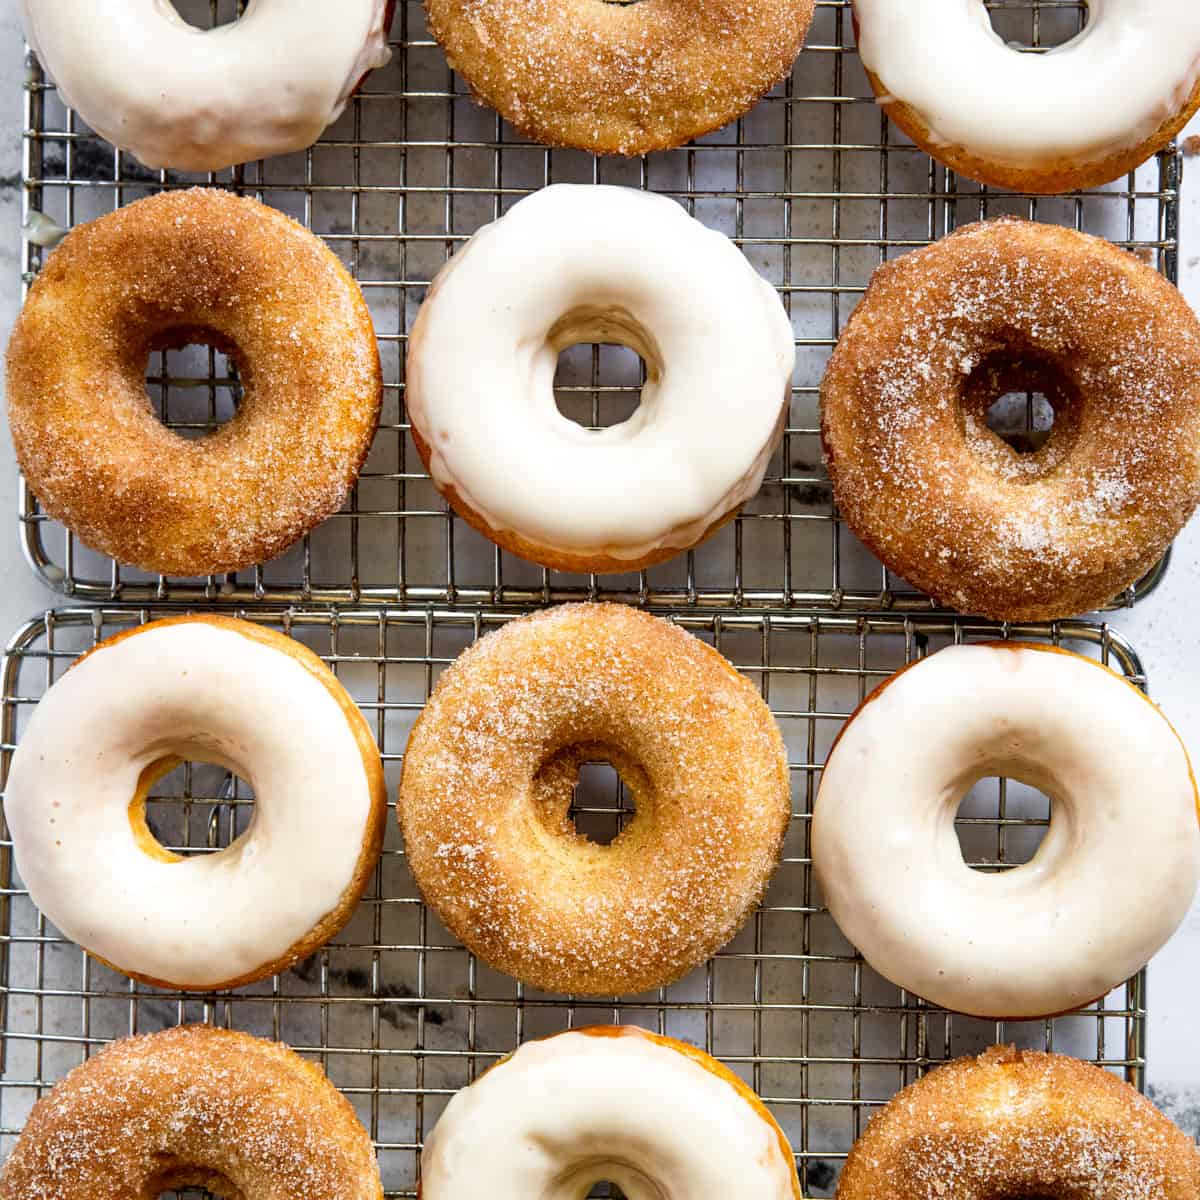 How to Make Homemade Donuts